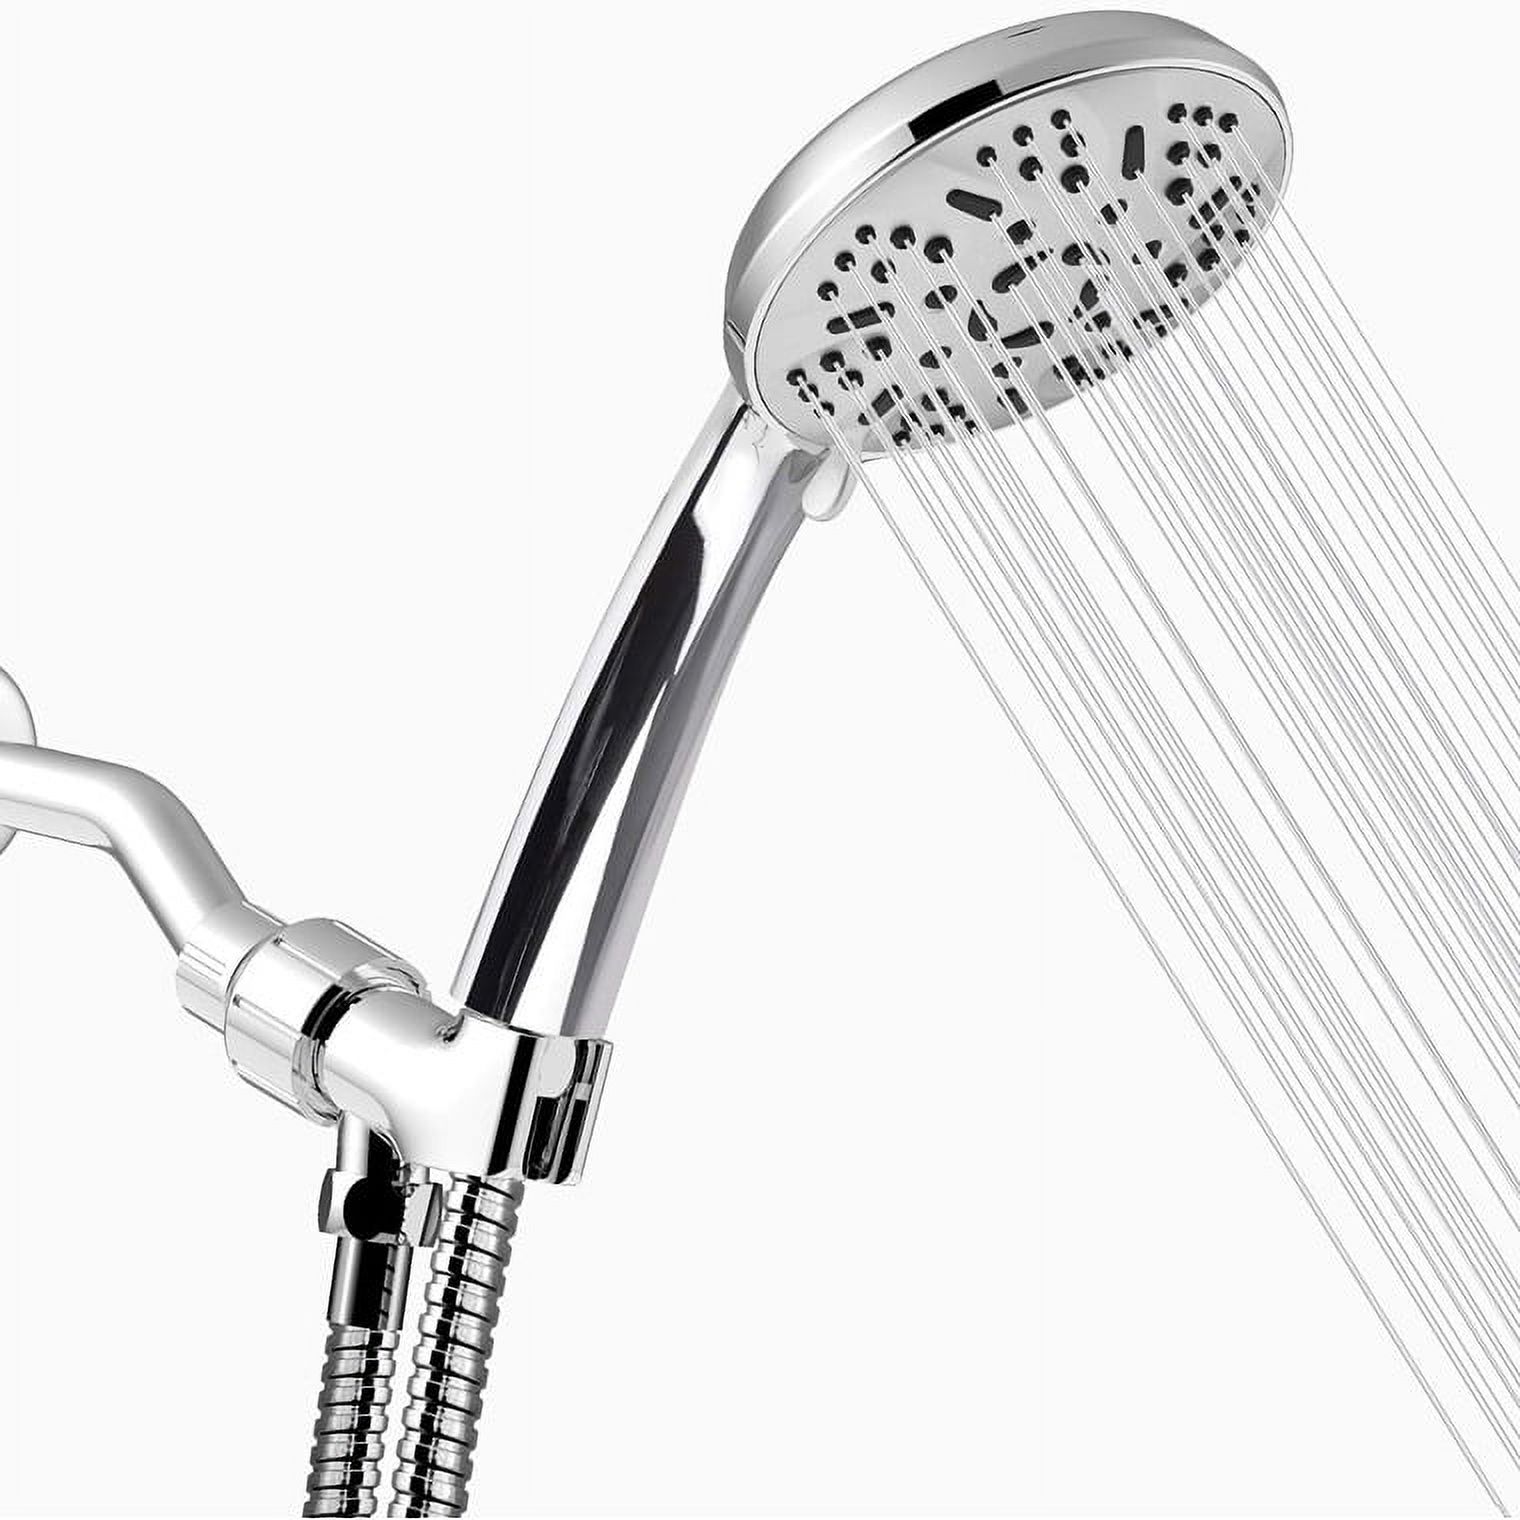 AQwzh High Pressure Handheld Shower Head – 9 Spray Modes with 60 Inch Hose (Chrome) - image 1 of 8